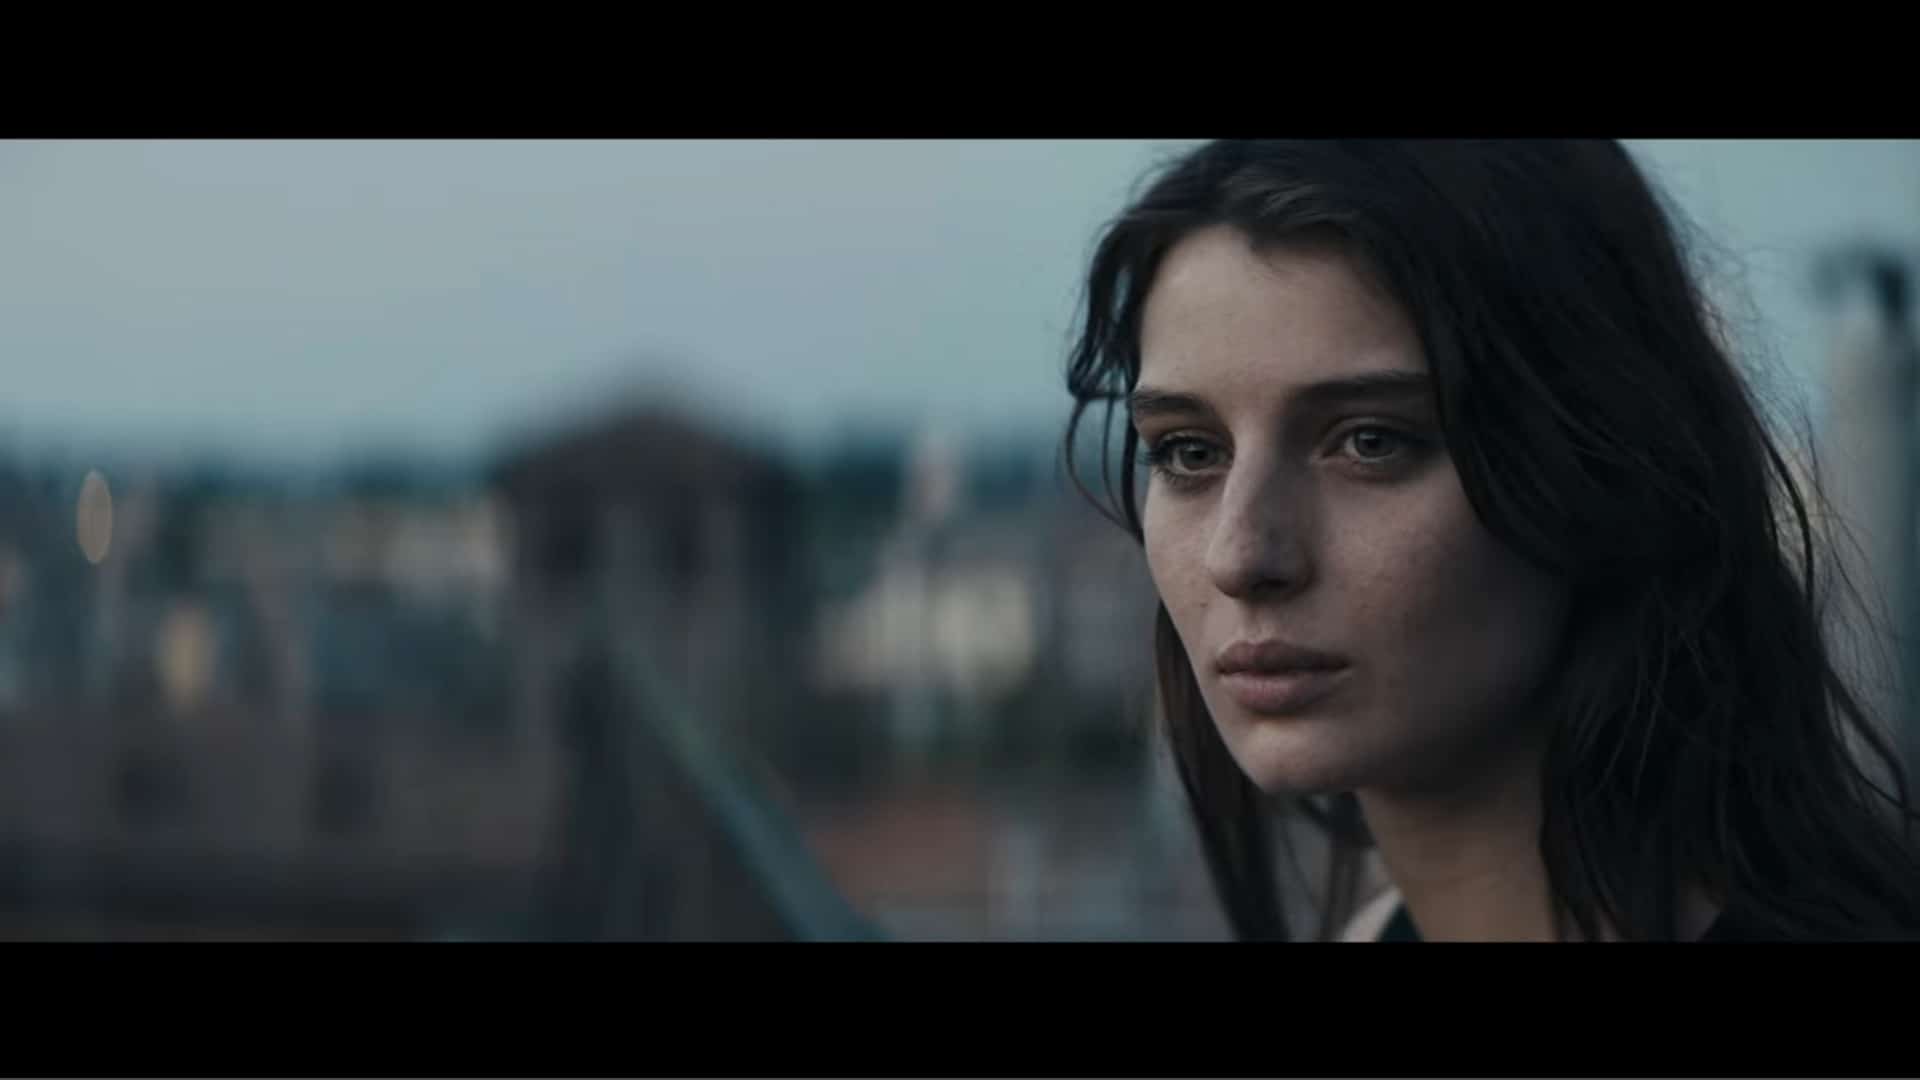 Mirta (Alice Pagani) at the end of the movie